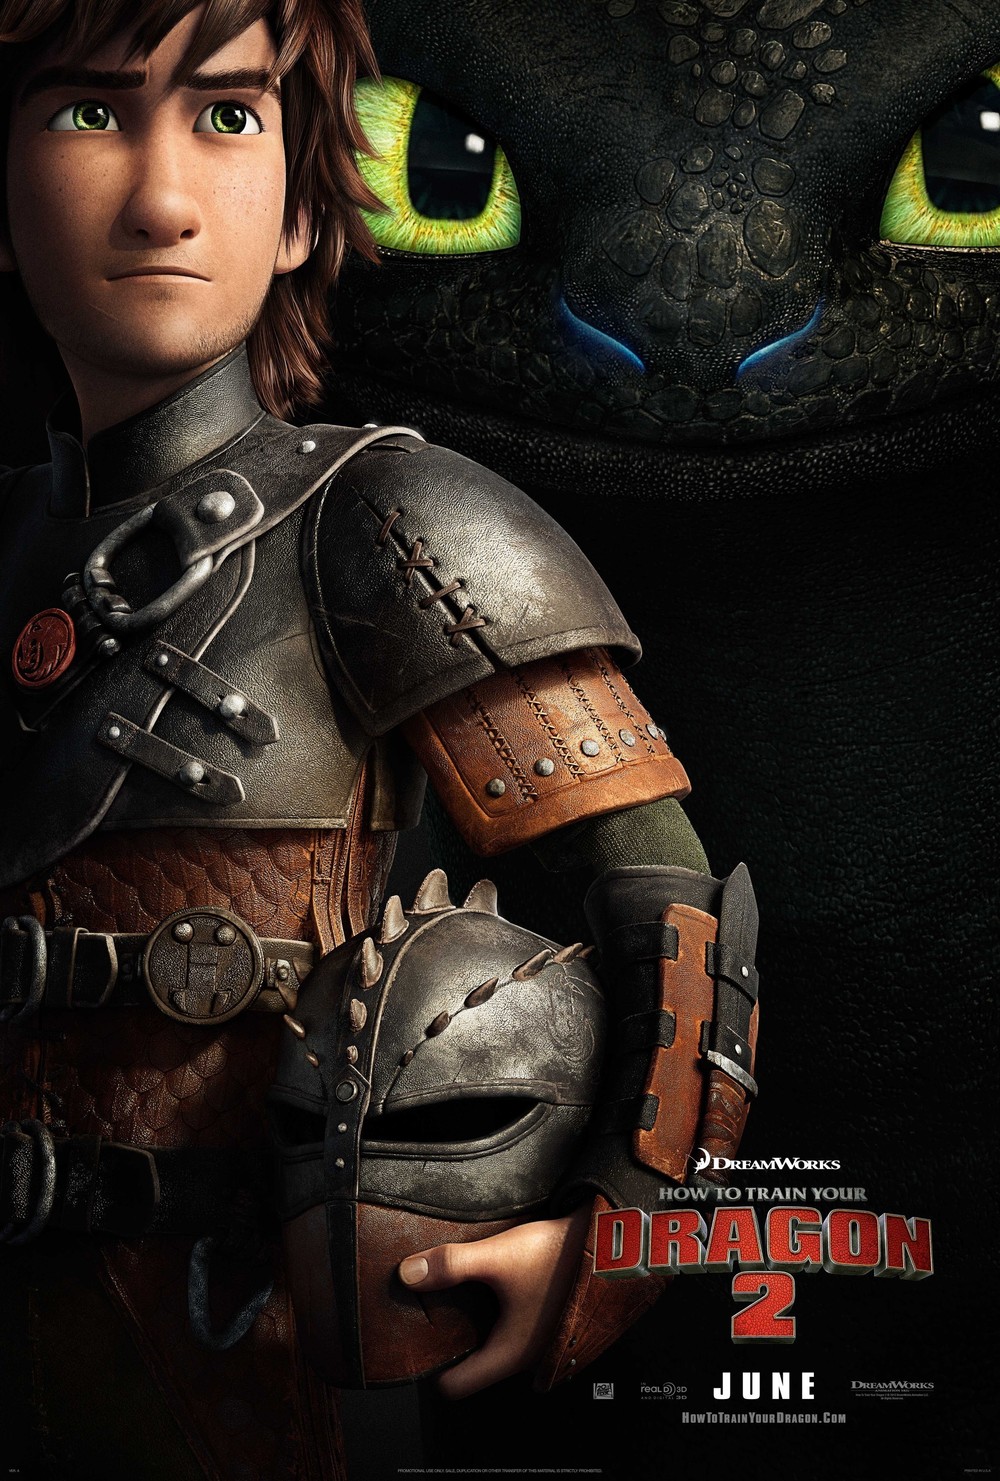 How to Train Your Dragon 2: A Comprehensive Guide to Mastering Dragon Training